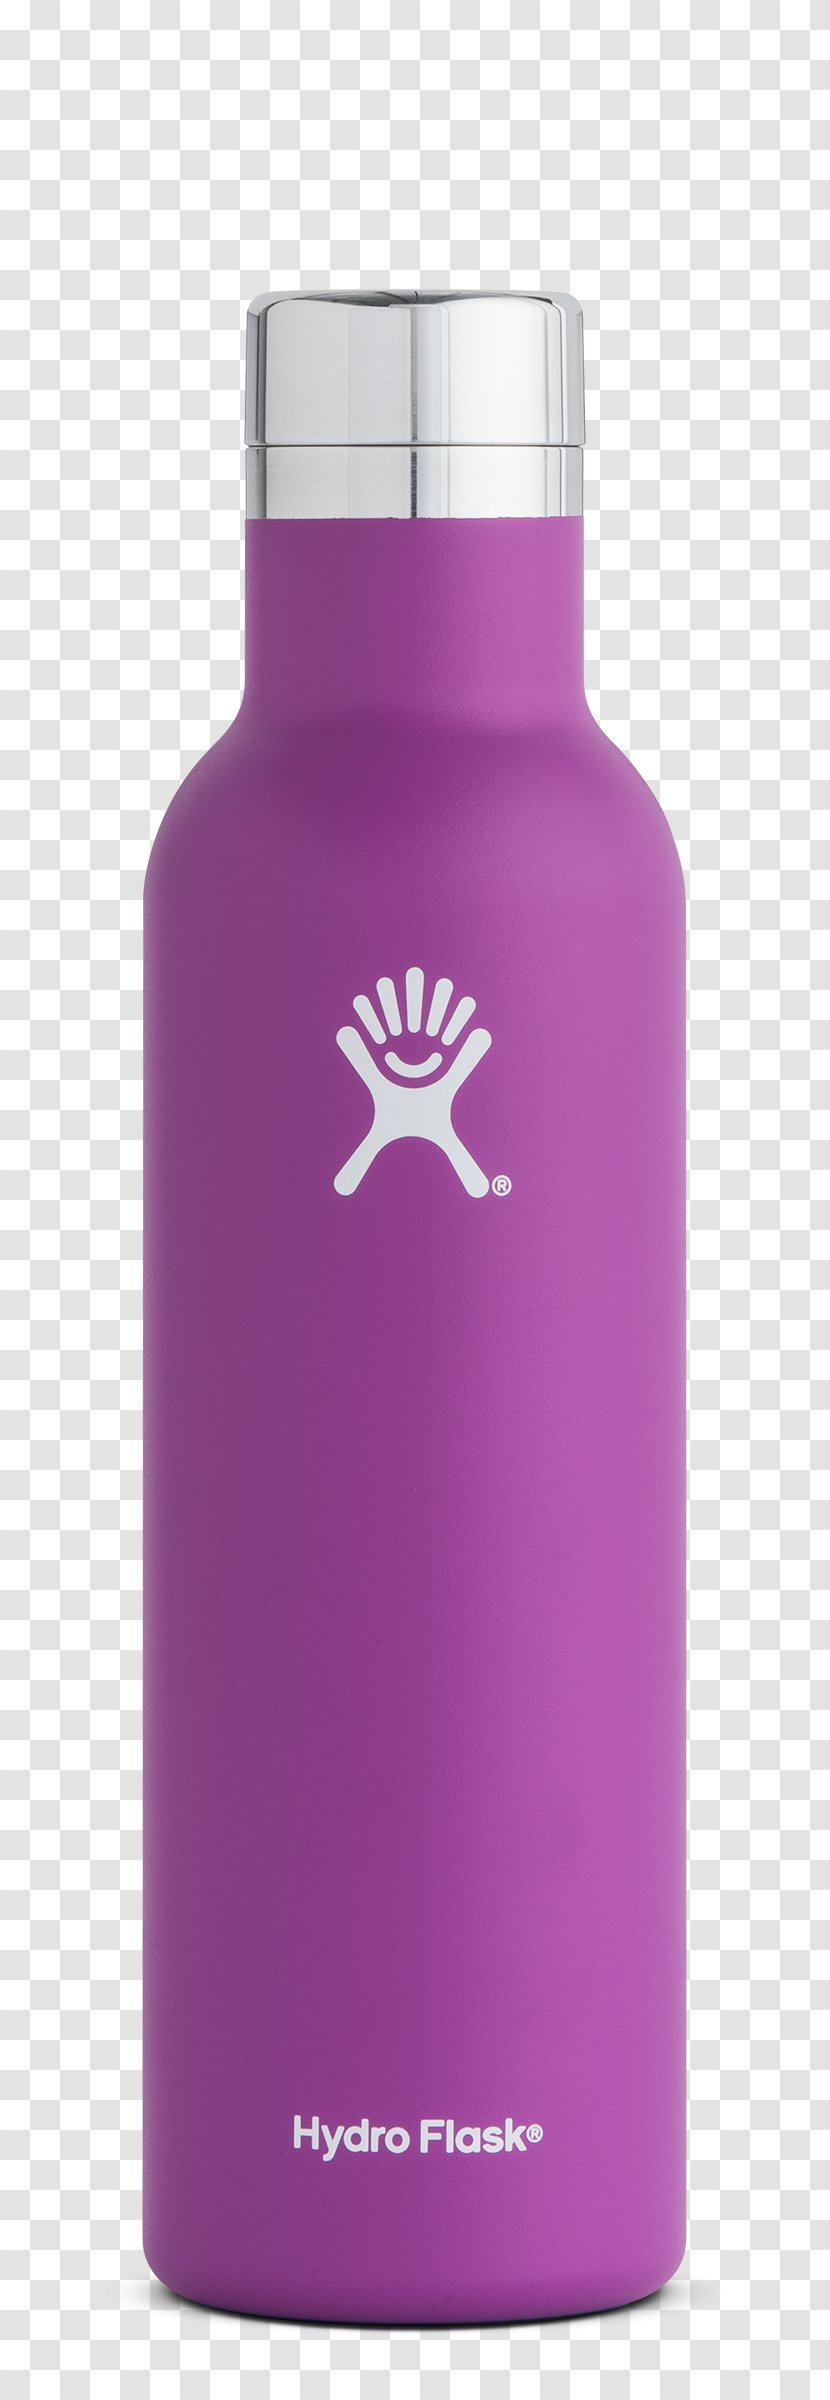 Wine Water Bottles Hydro Flask Liquid Transparent PNG